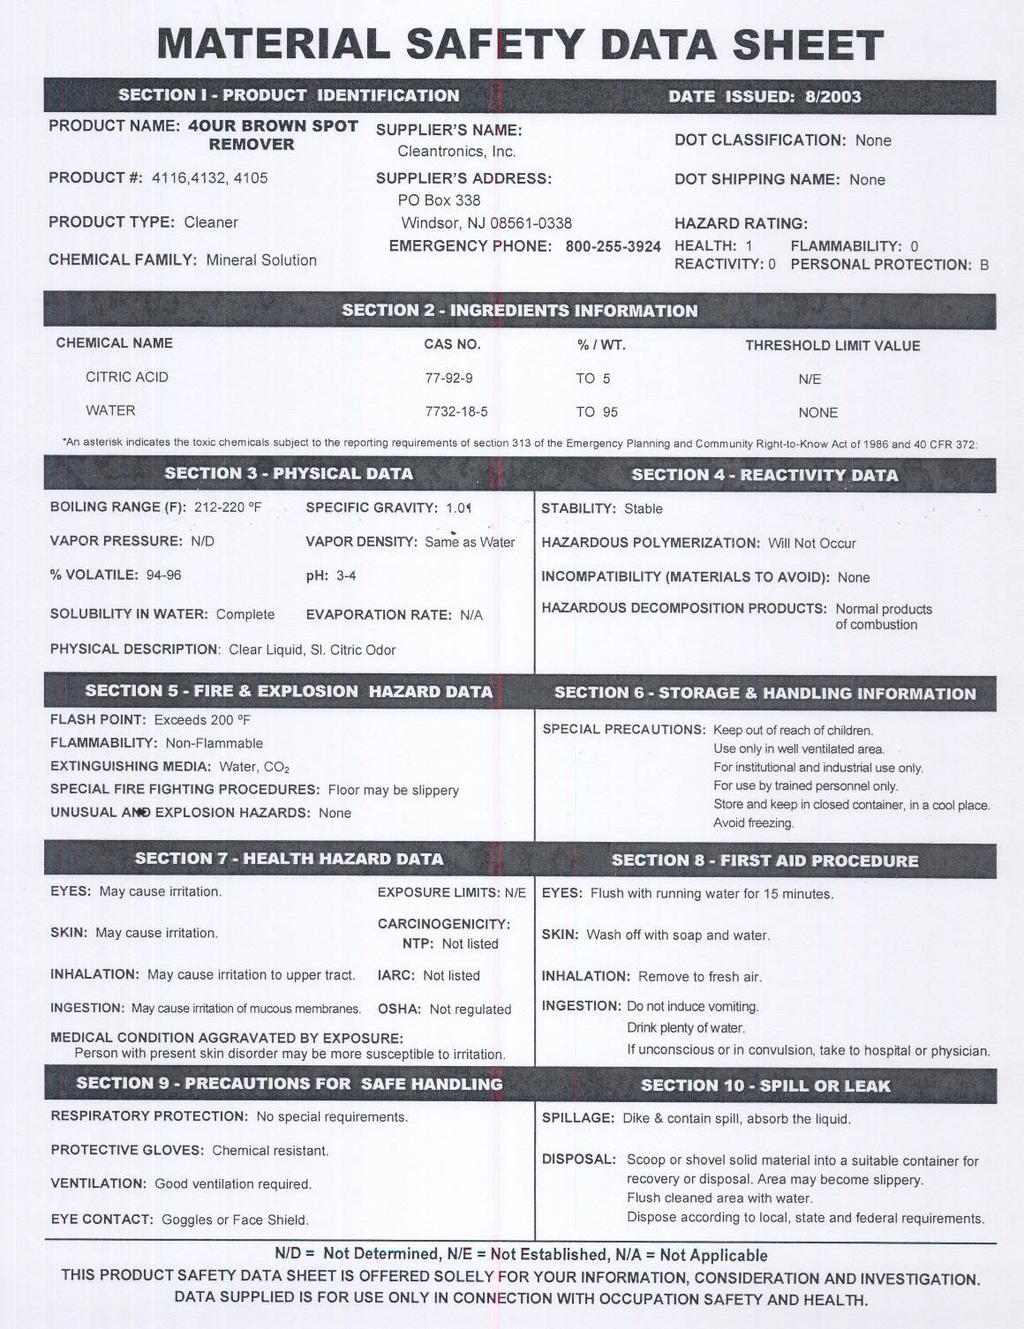 MATERAL SAFETY DATA SHEET, 1 SECTON -PRODUCT DENTFCATON DATE SSUED: 8/2003 t PRODUCT NAME: 40UR BROWN SPOT SUPPLER'S NAME: REMOVER Cleantronics, lng, PRODUCT #: 4116,4132,4105 SUPPLER'S ADDRESS: DOT